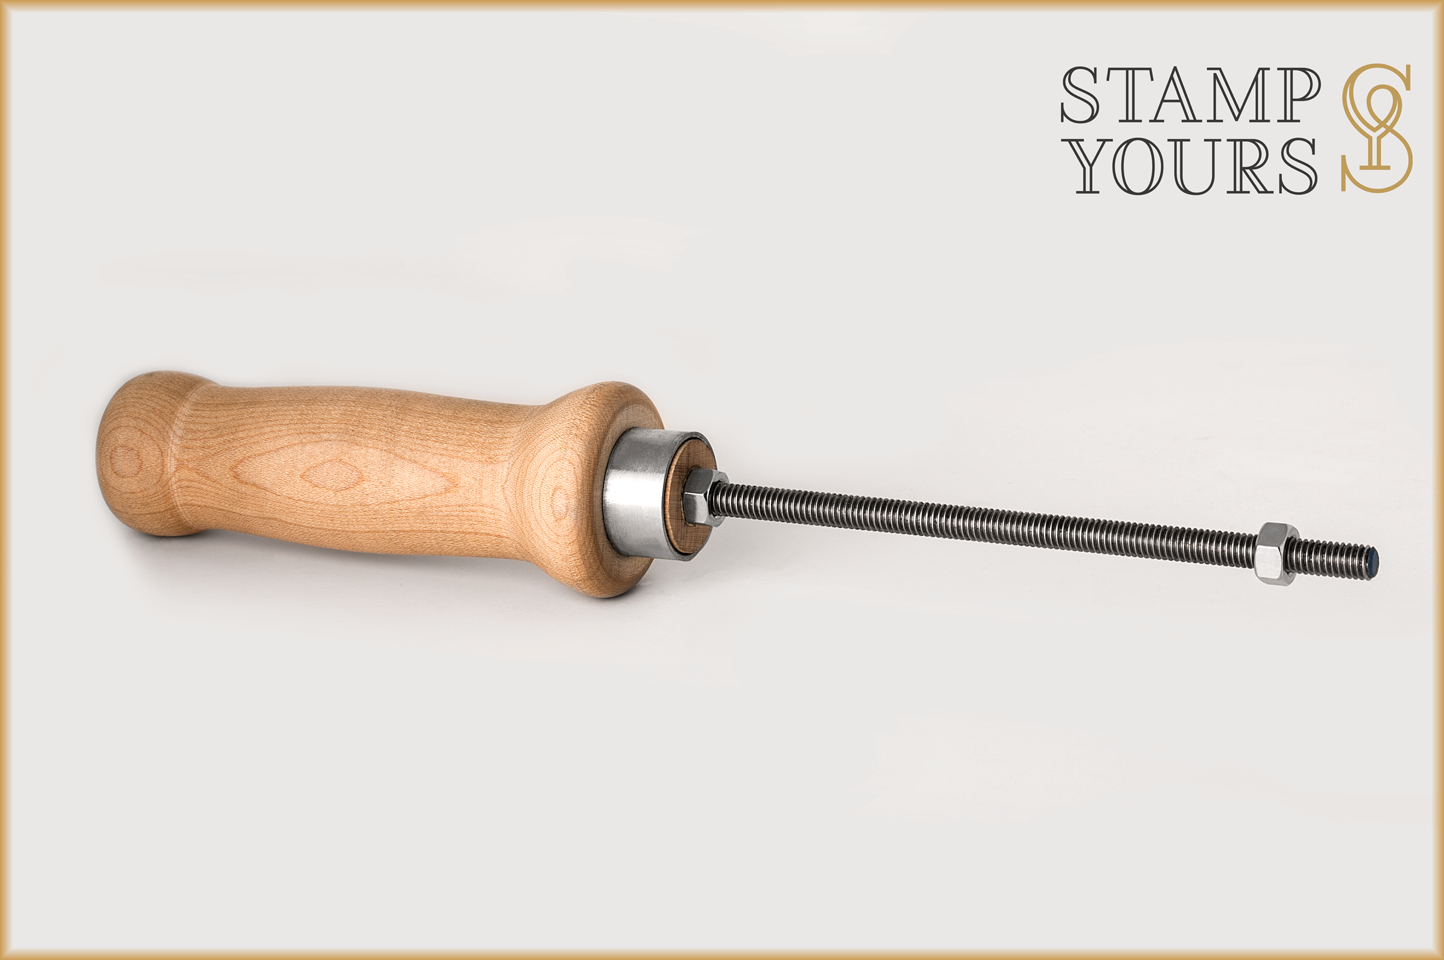 Flame Heating Handle - Stamp Yours